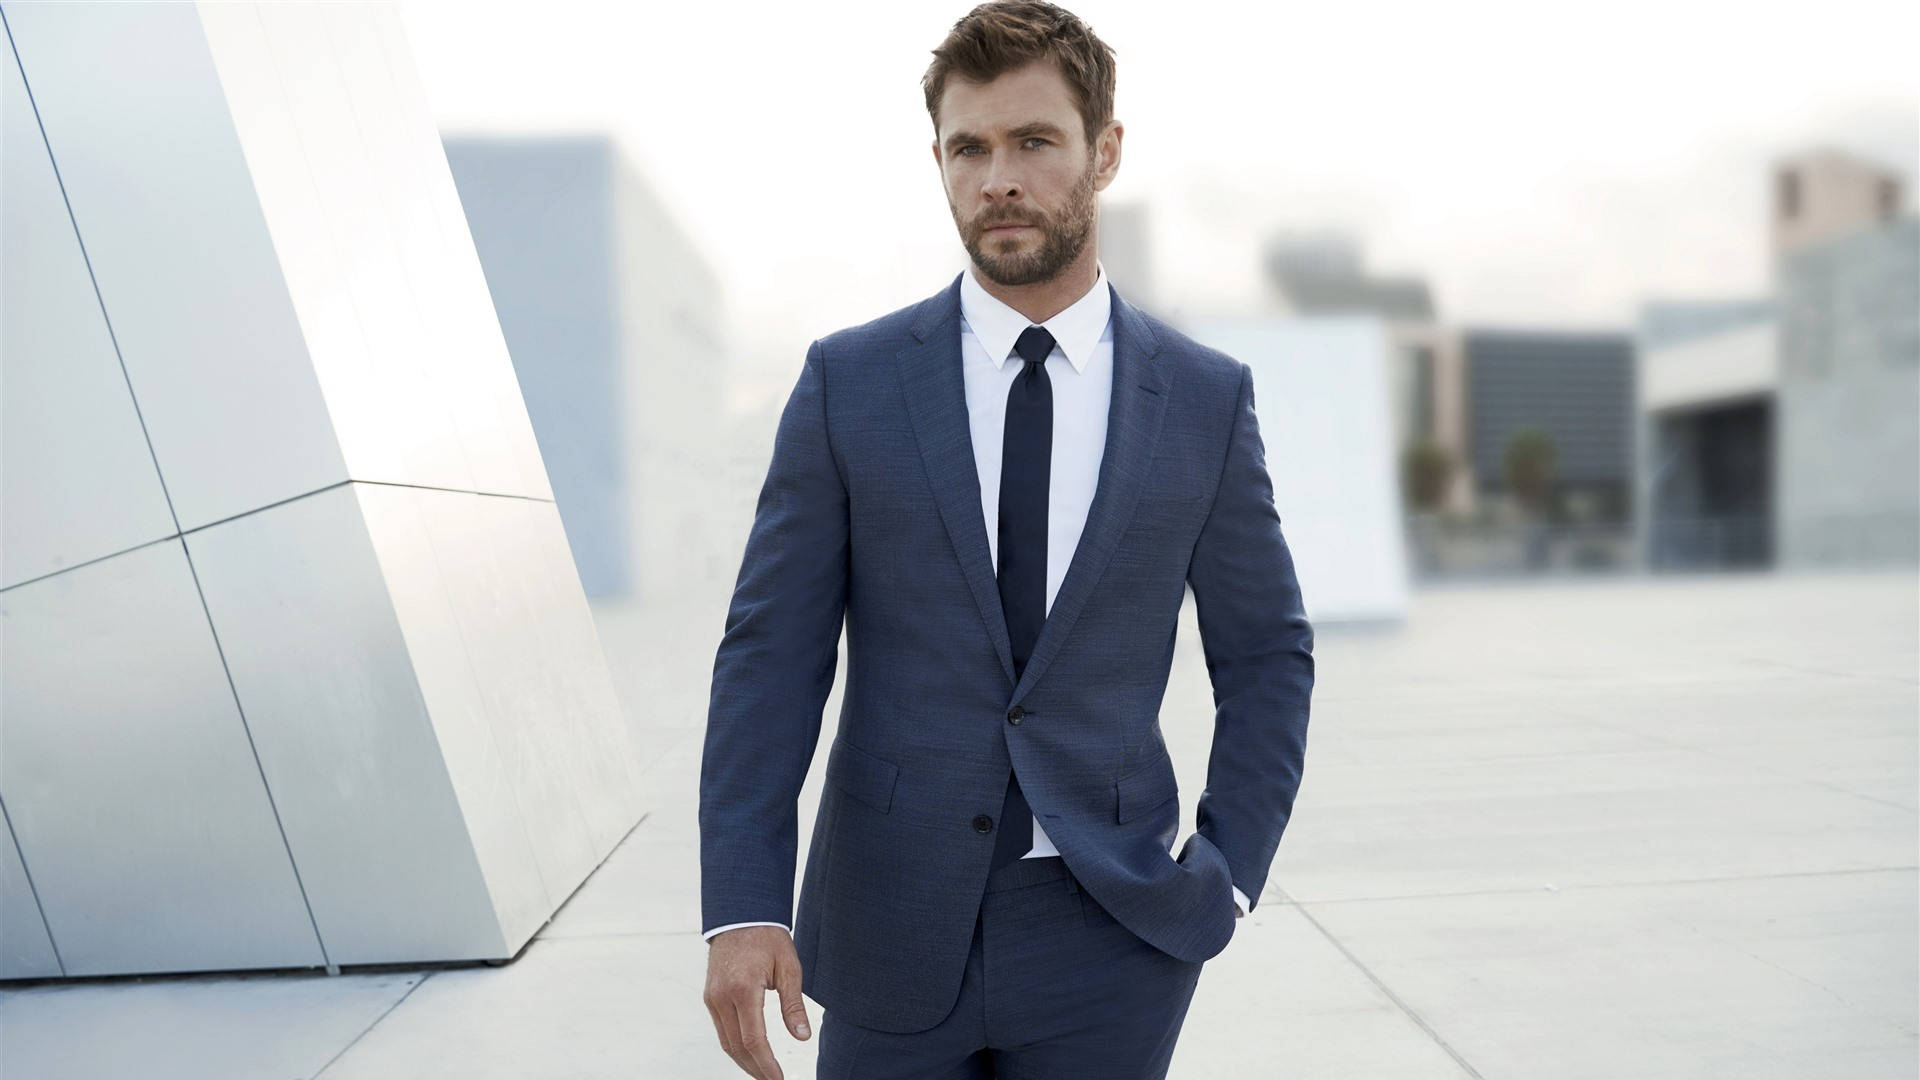 Chris Hemsworth Looks Confident And Powerful In A Suit. Background